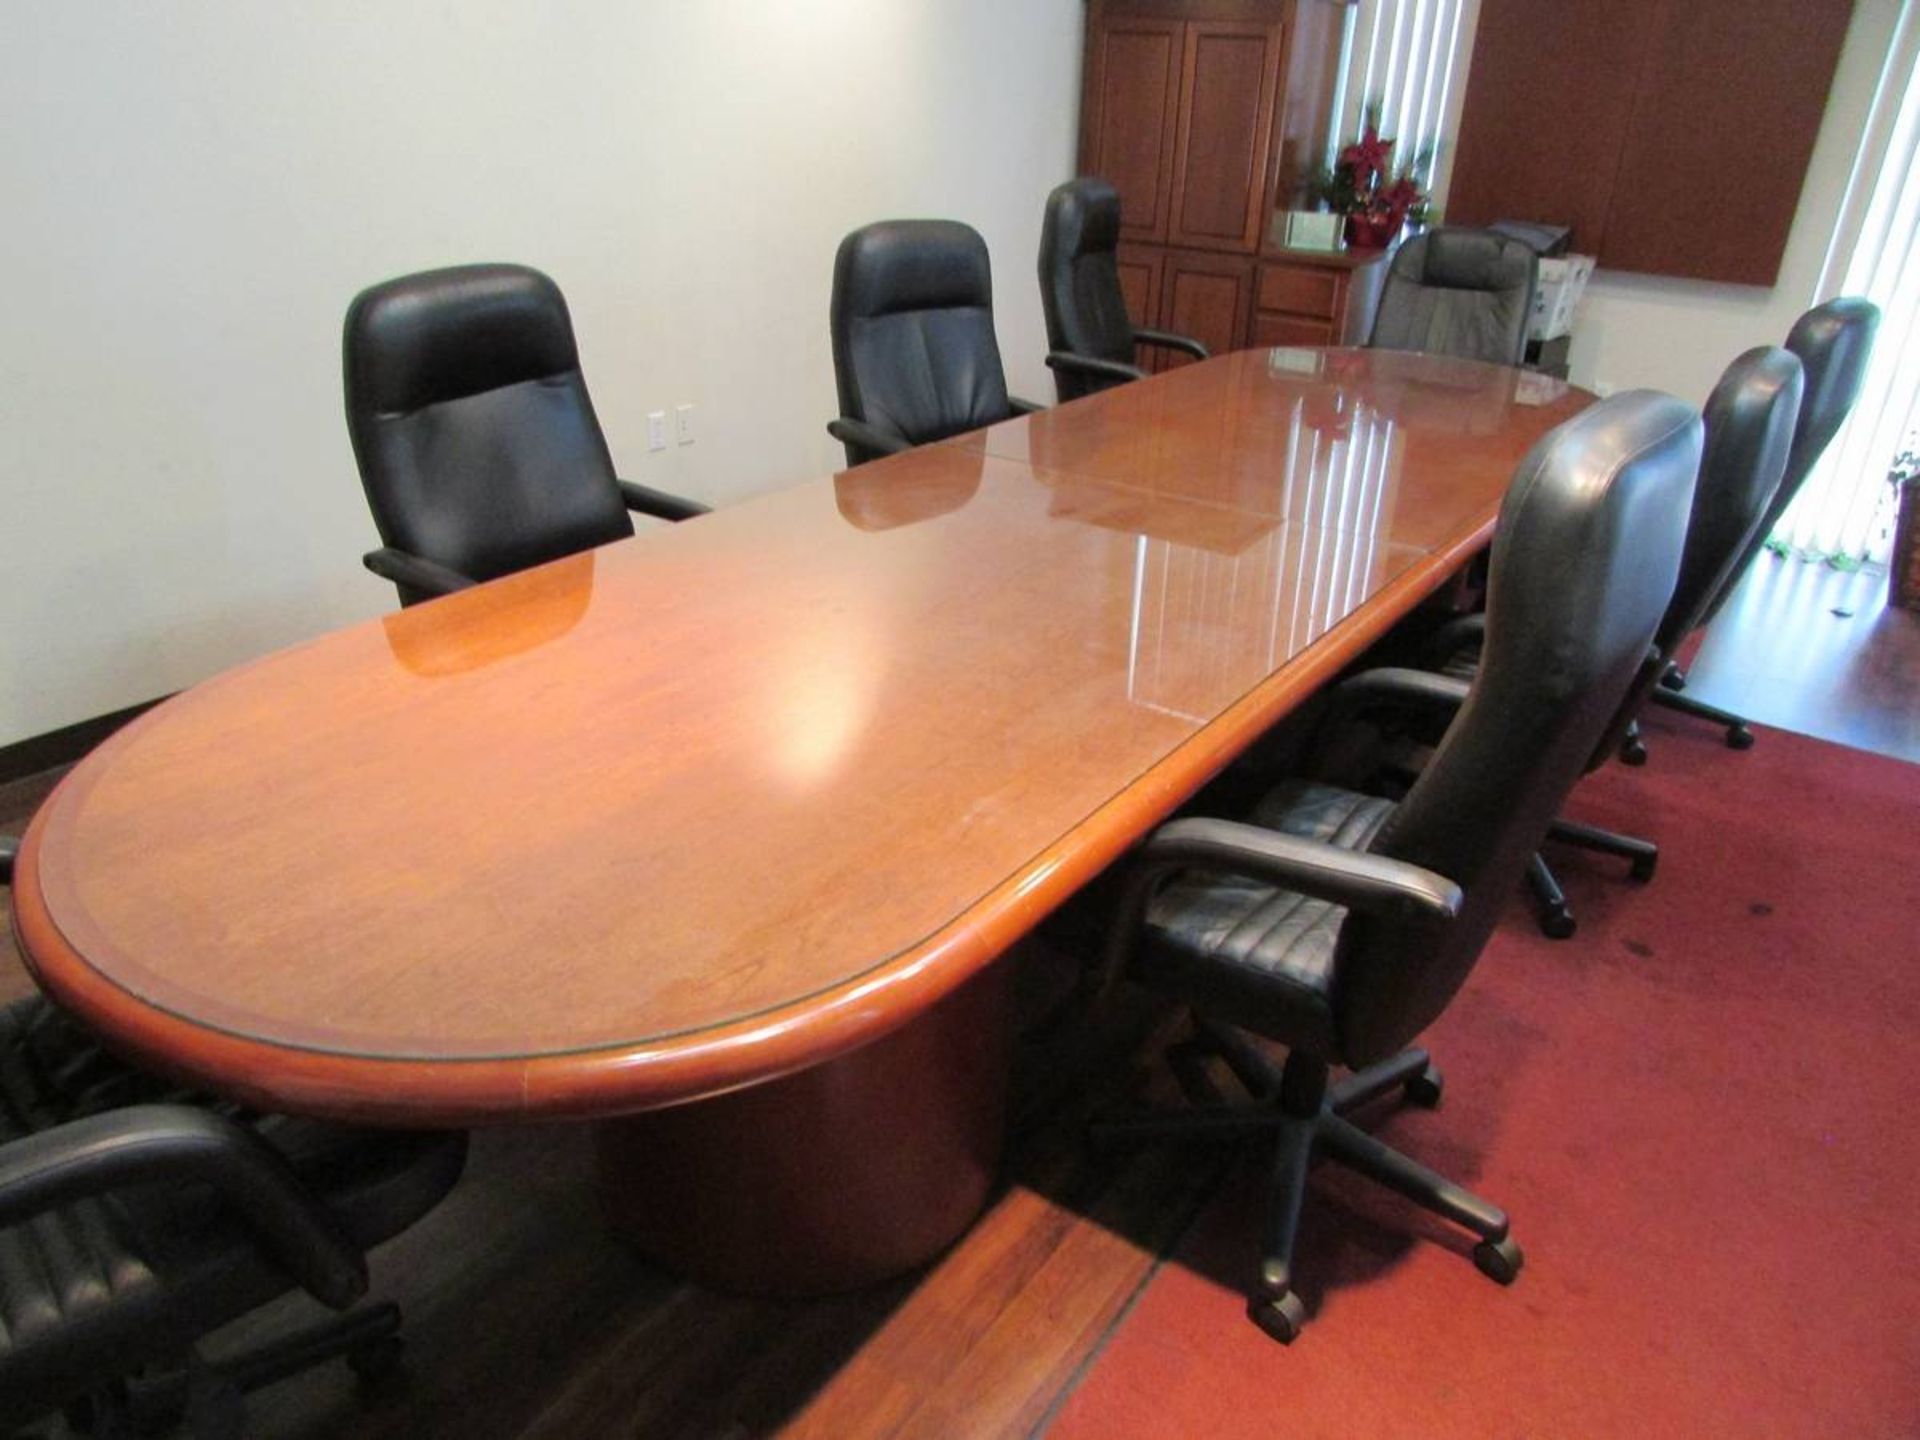 14'x4' Wood Conference Room Table - Image 2 of 9